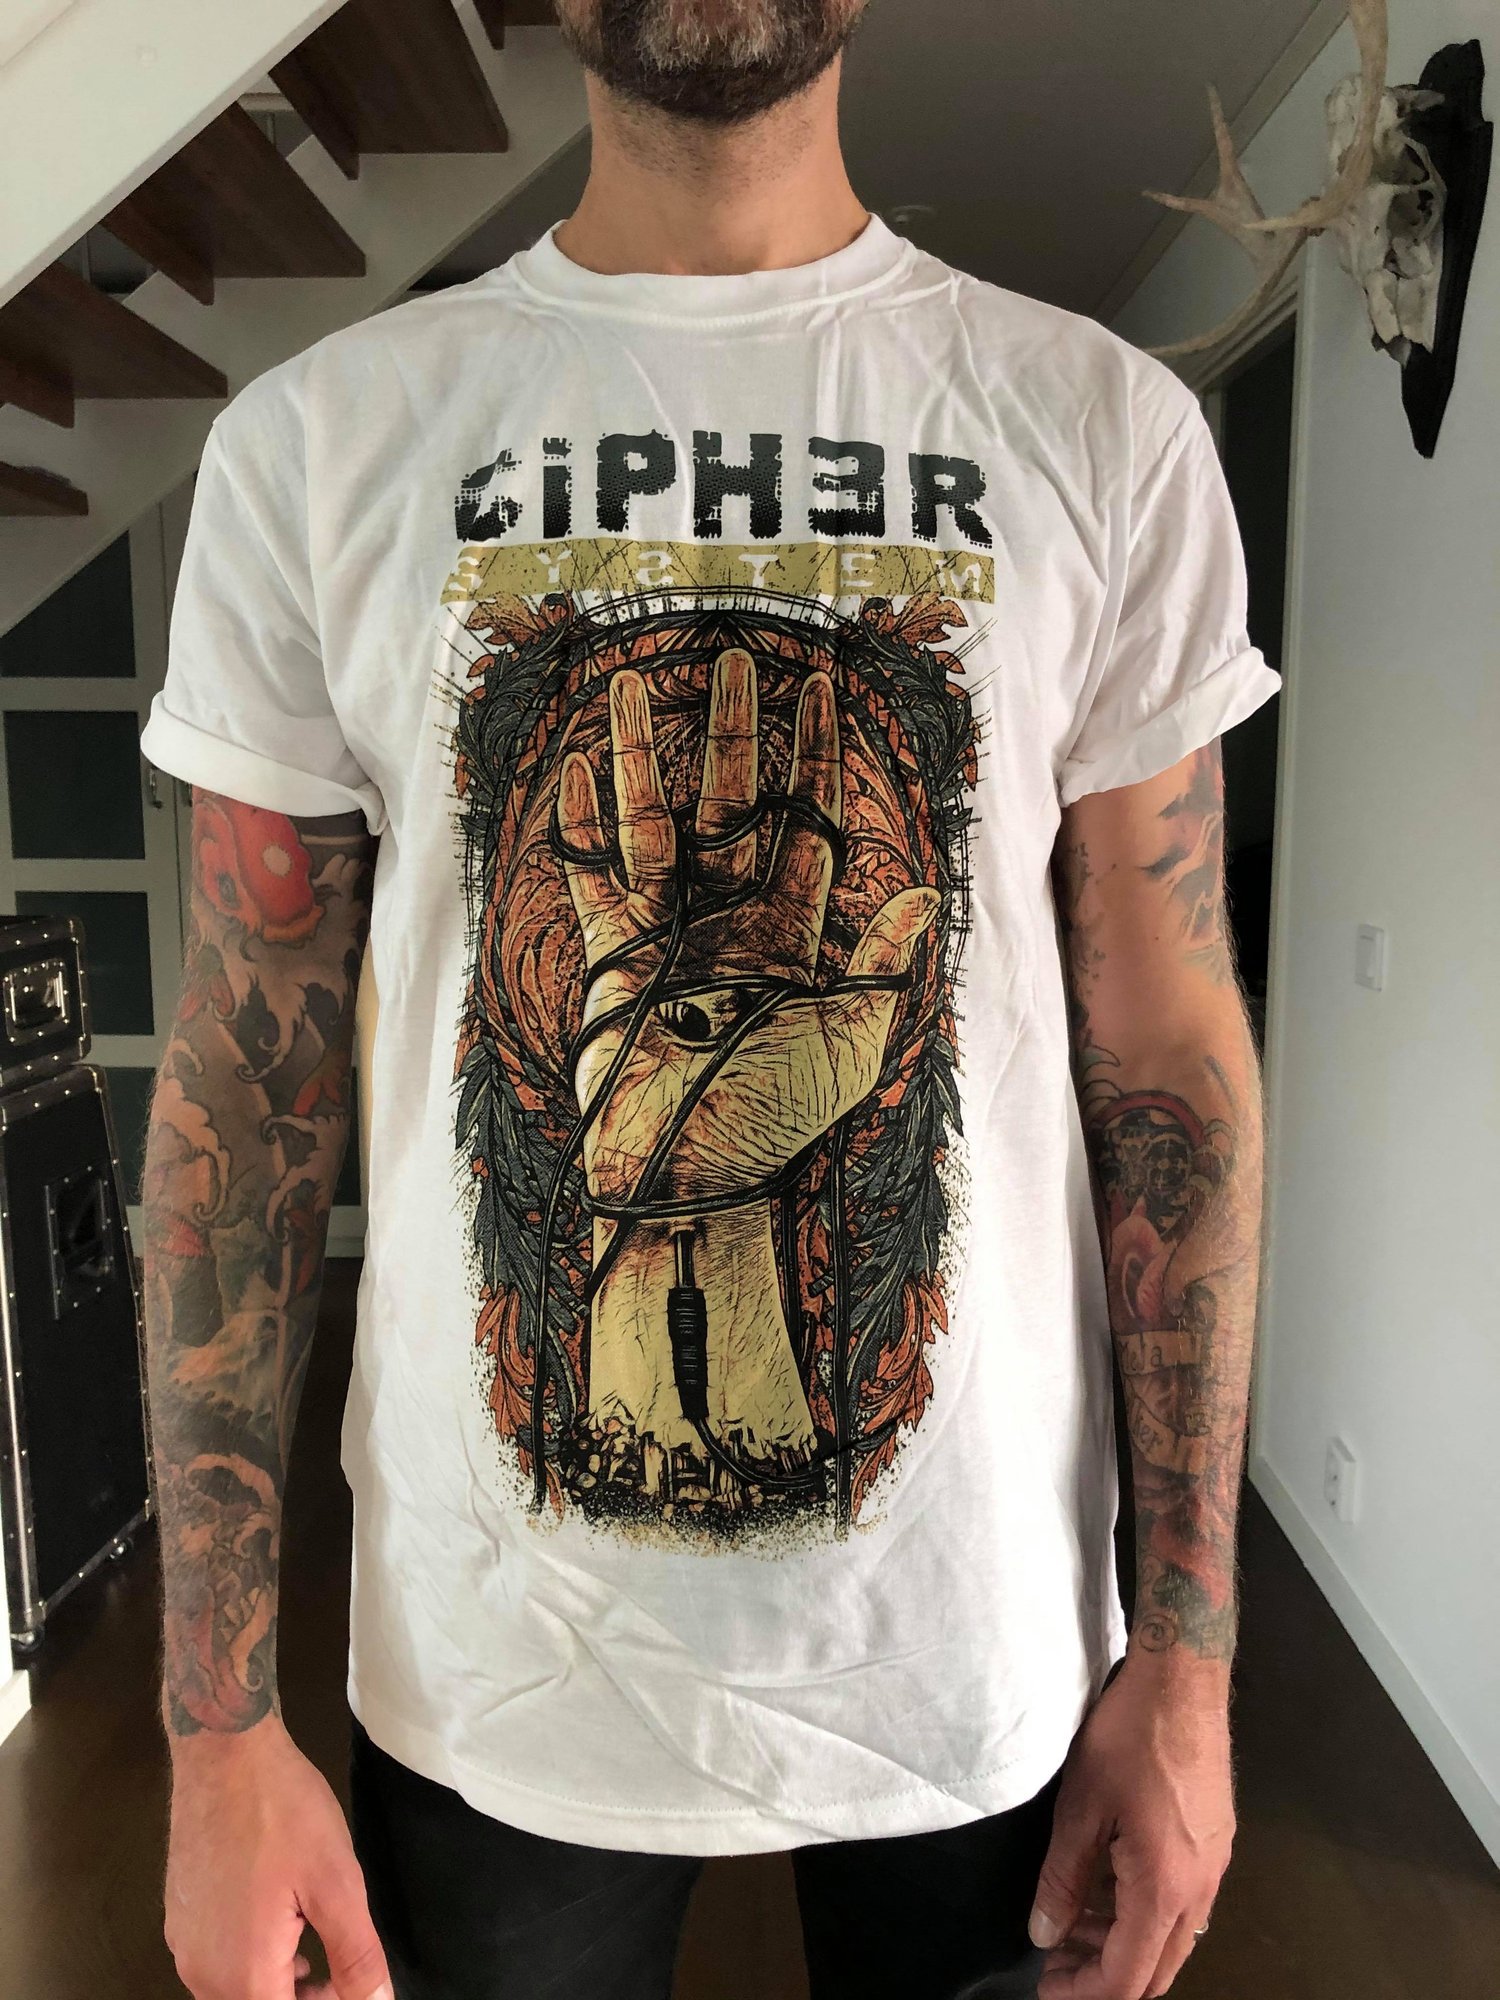 Cipher system - T-shirt "Hand "